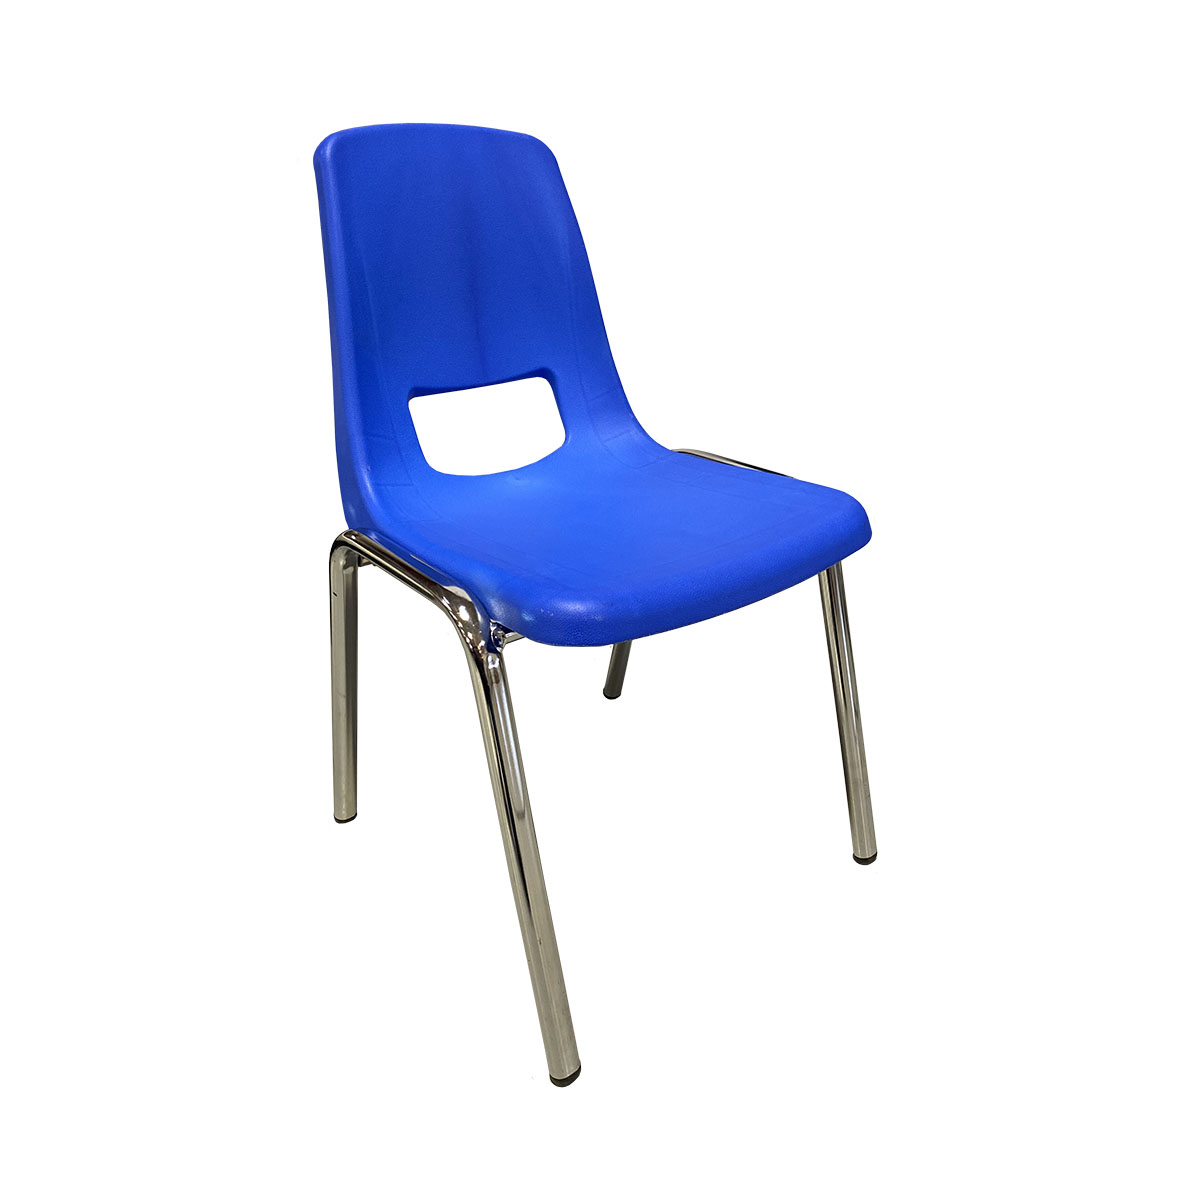 Chair Blue Seat Chrome Leg Stacking Child Size 14"